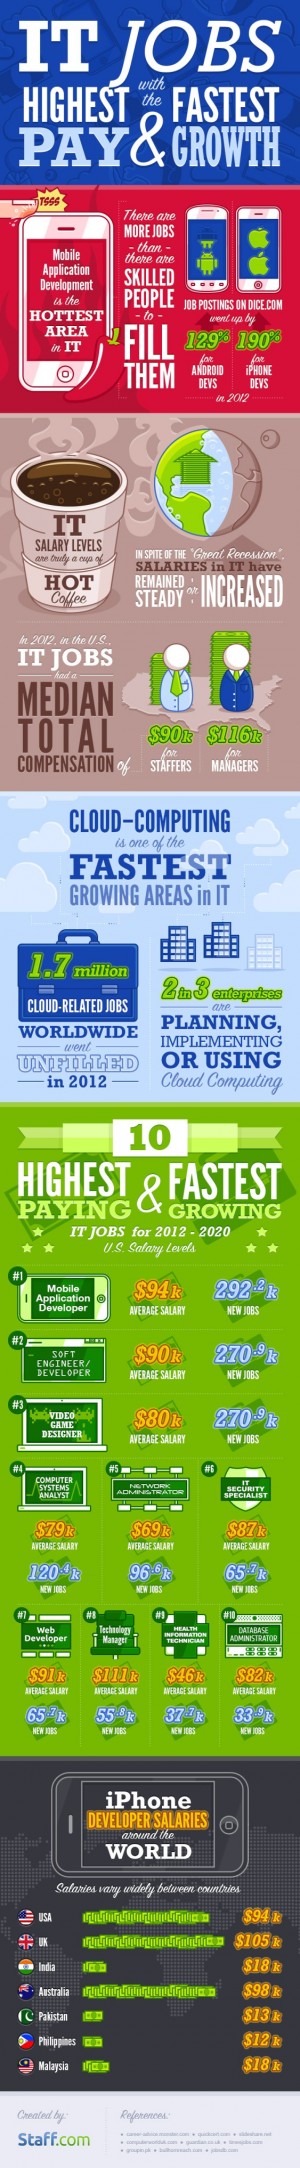 IT Jobs Offer Fastest Growth and Highest Pay